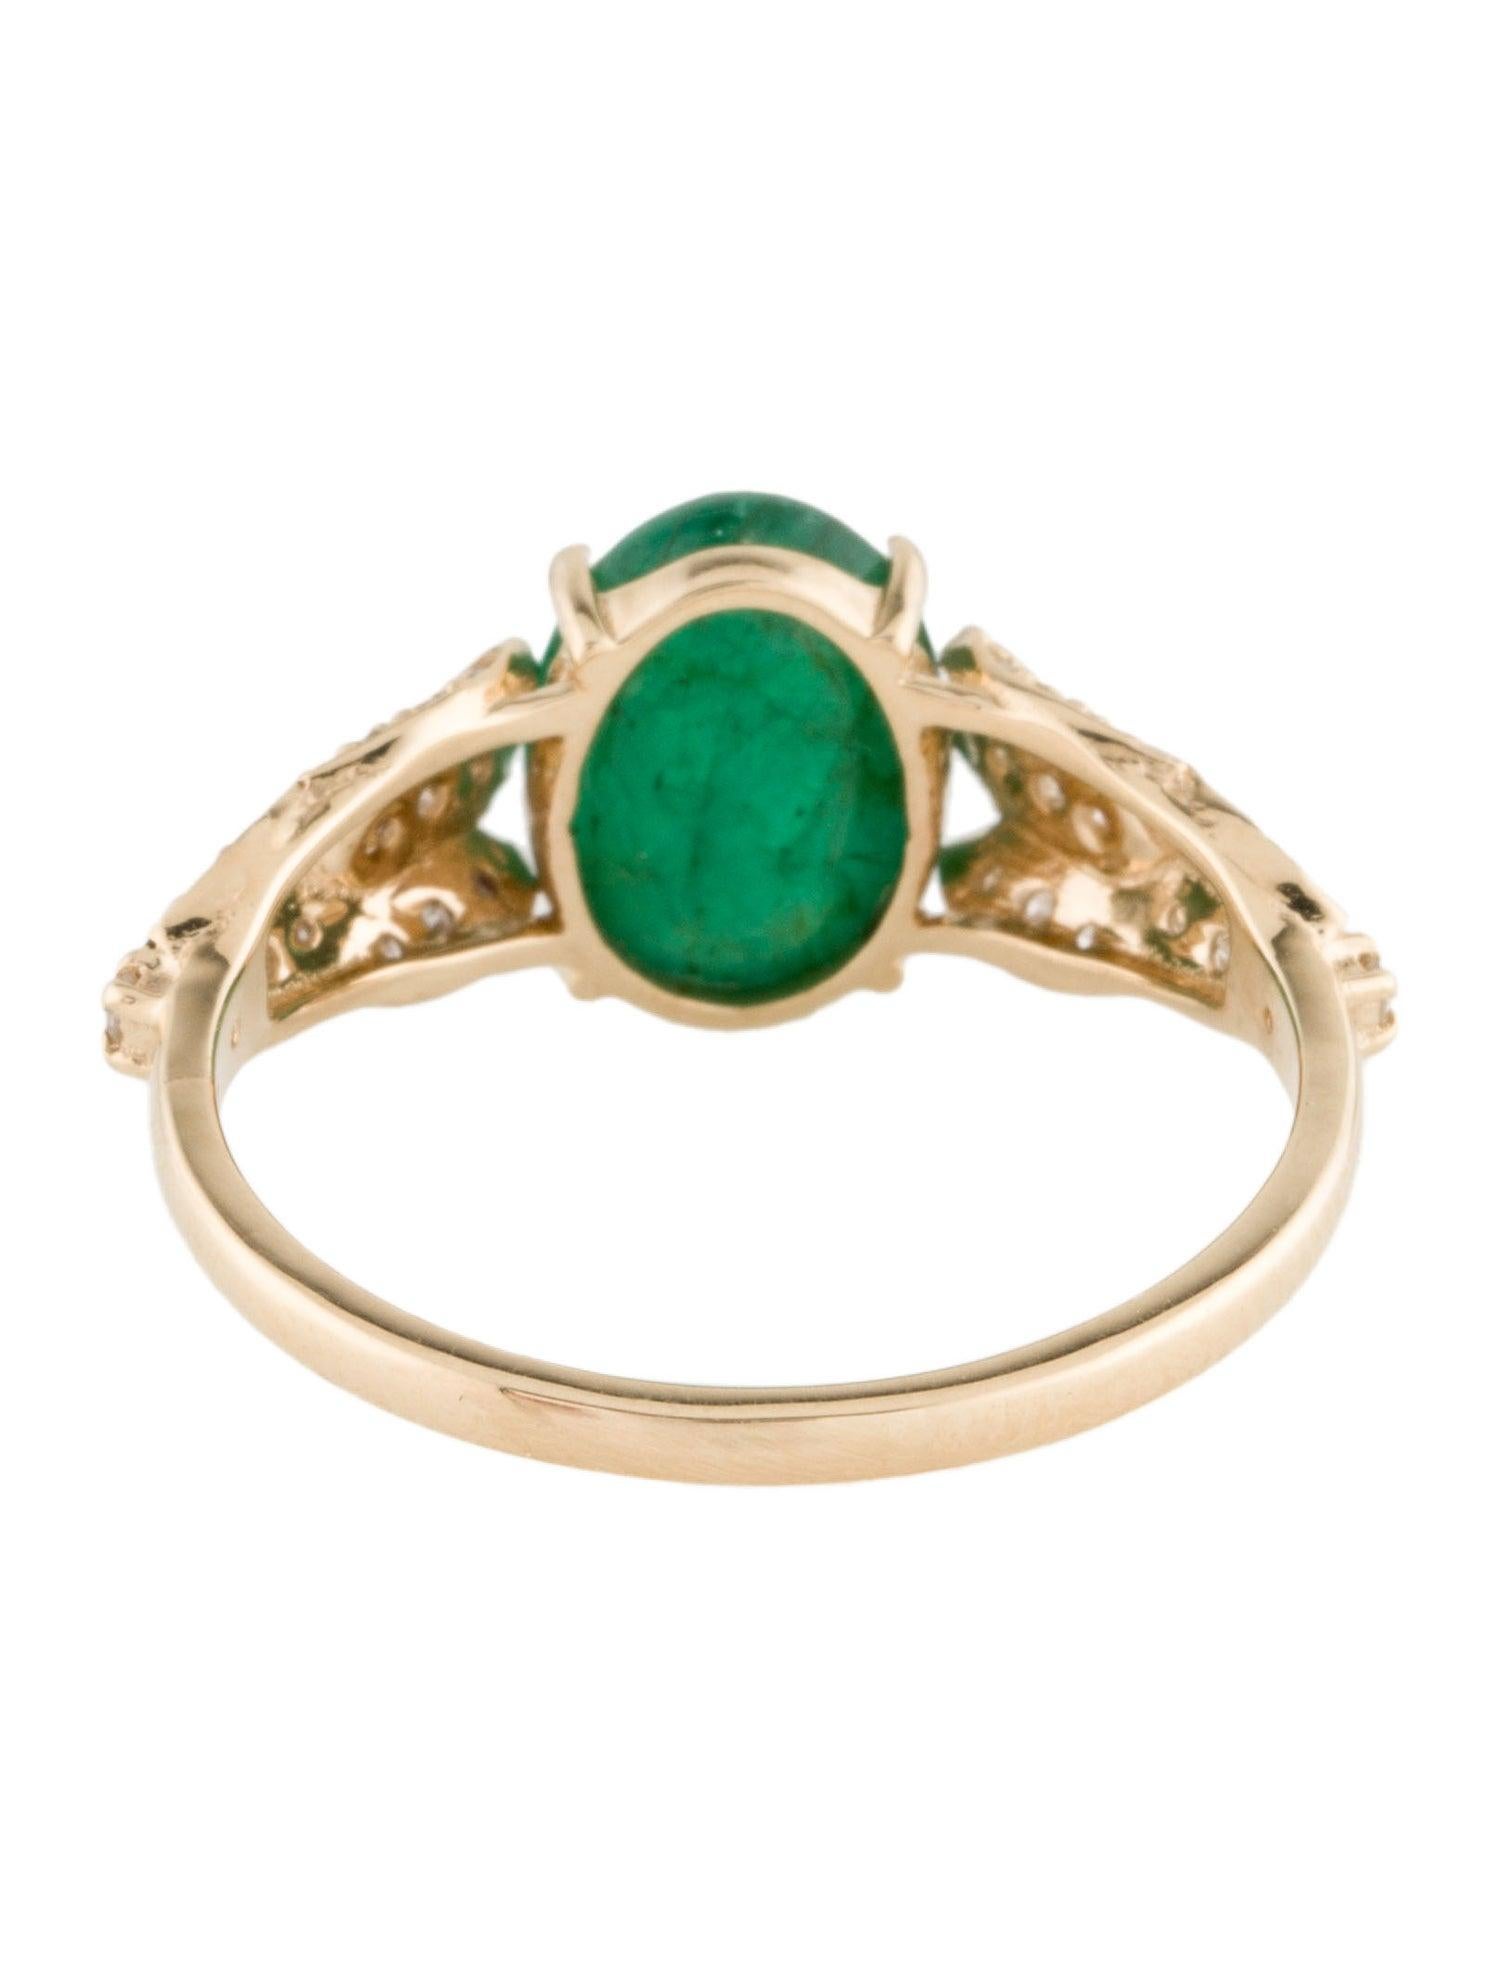 Brilliant Cut Luxurious 14K Emerald & Diamond Cocktail Ring - 2.90ct Gemstone - Size 8 For Sale